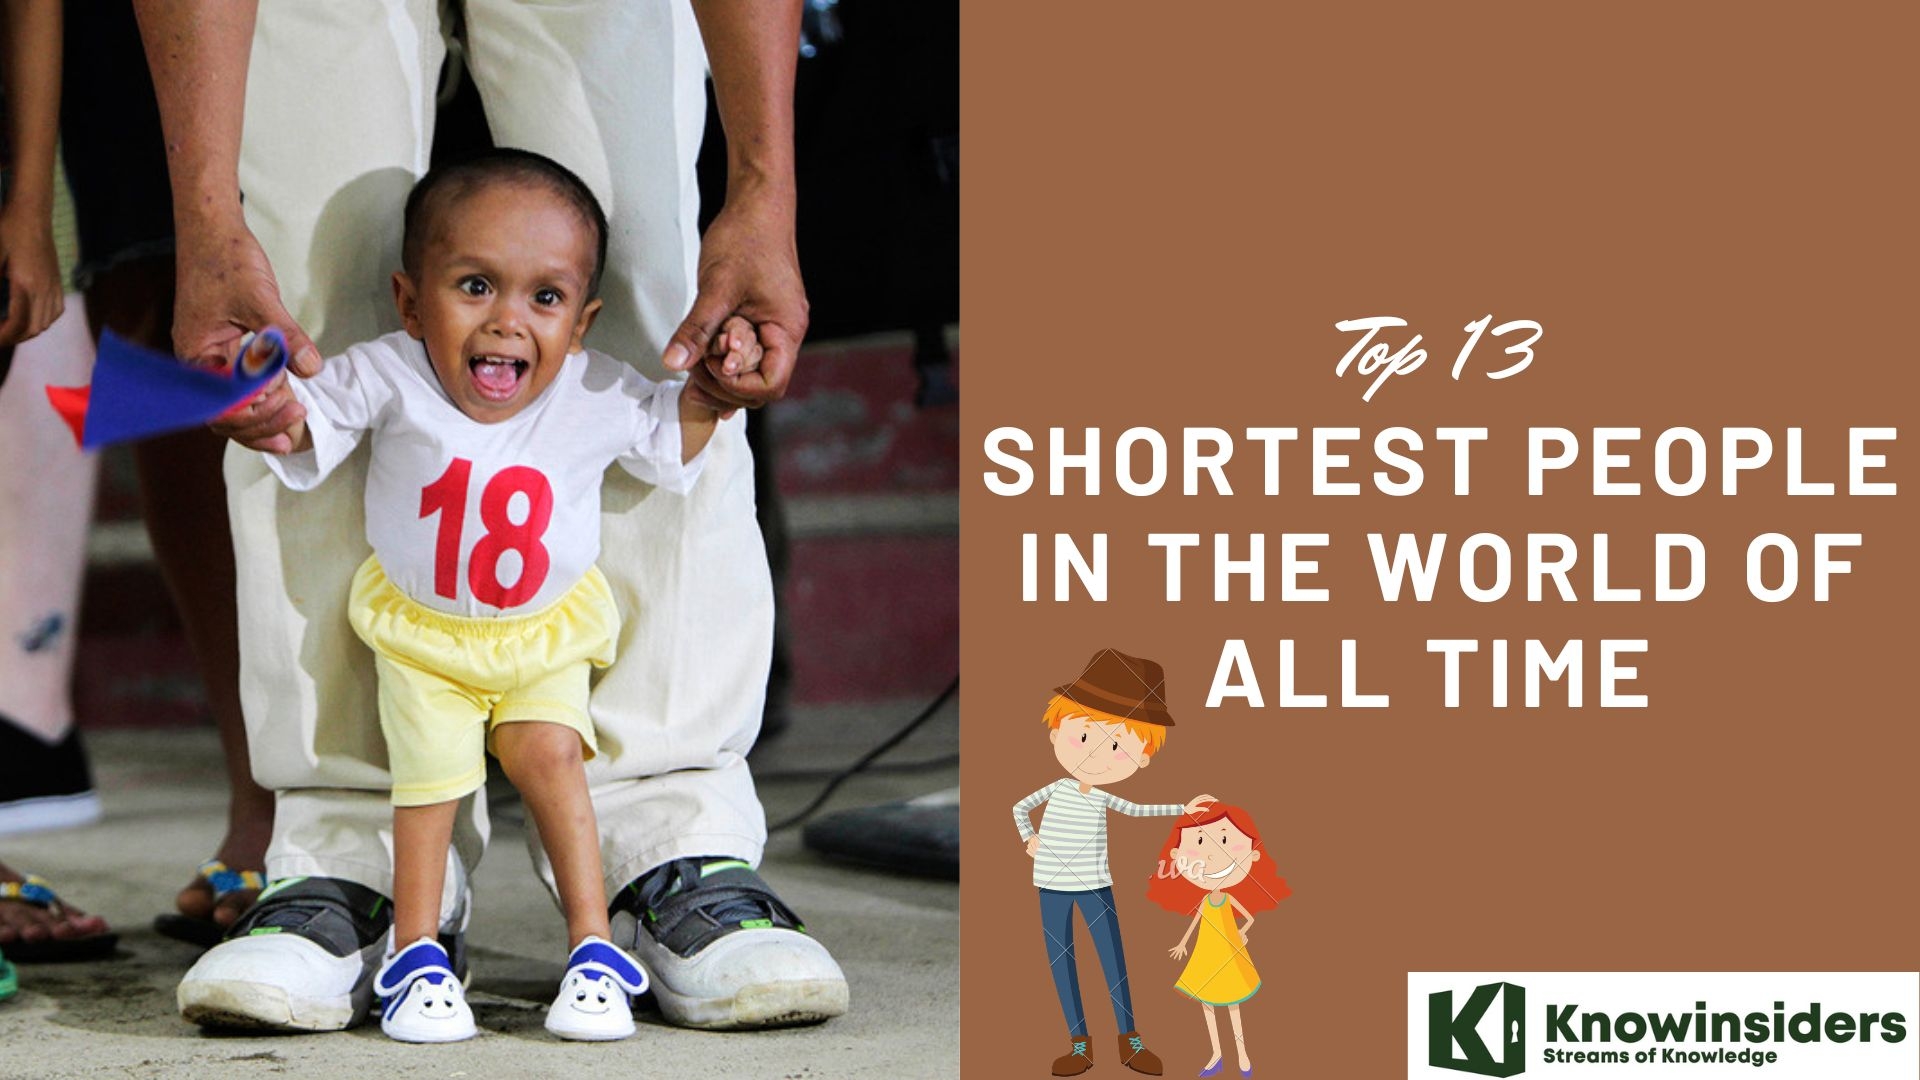 Top 13 Shortest People In The World Of All Time  Knowinsiders.com 